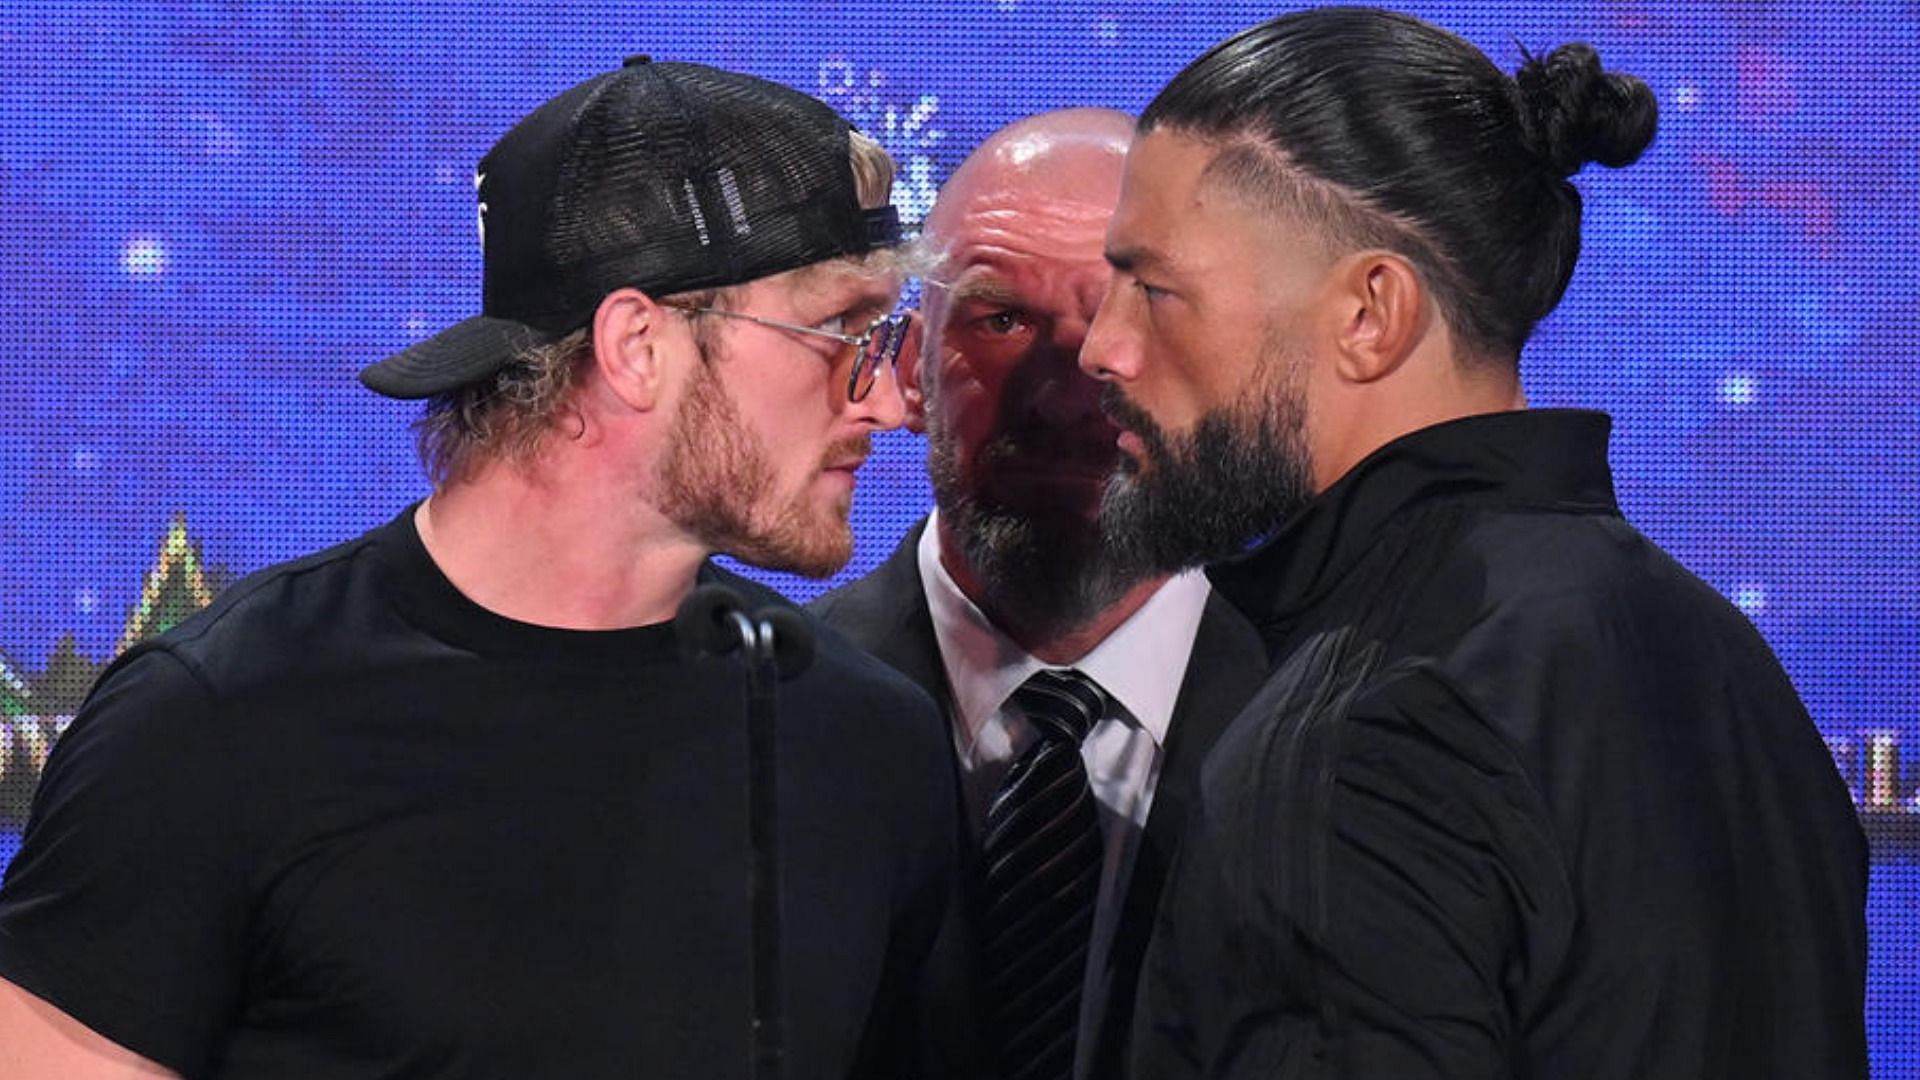 Roman Reigns and Logan Paul confront each other at WWE Crown Jewel press conference in Riyadh, Saudi Arabia on November 4, 2022.